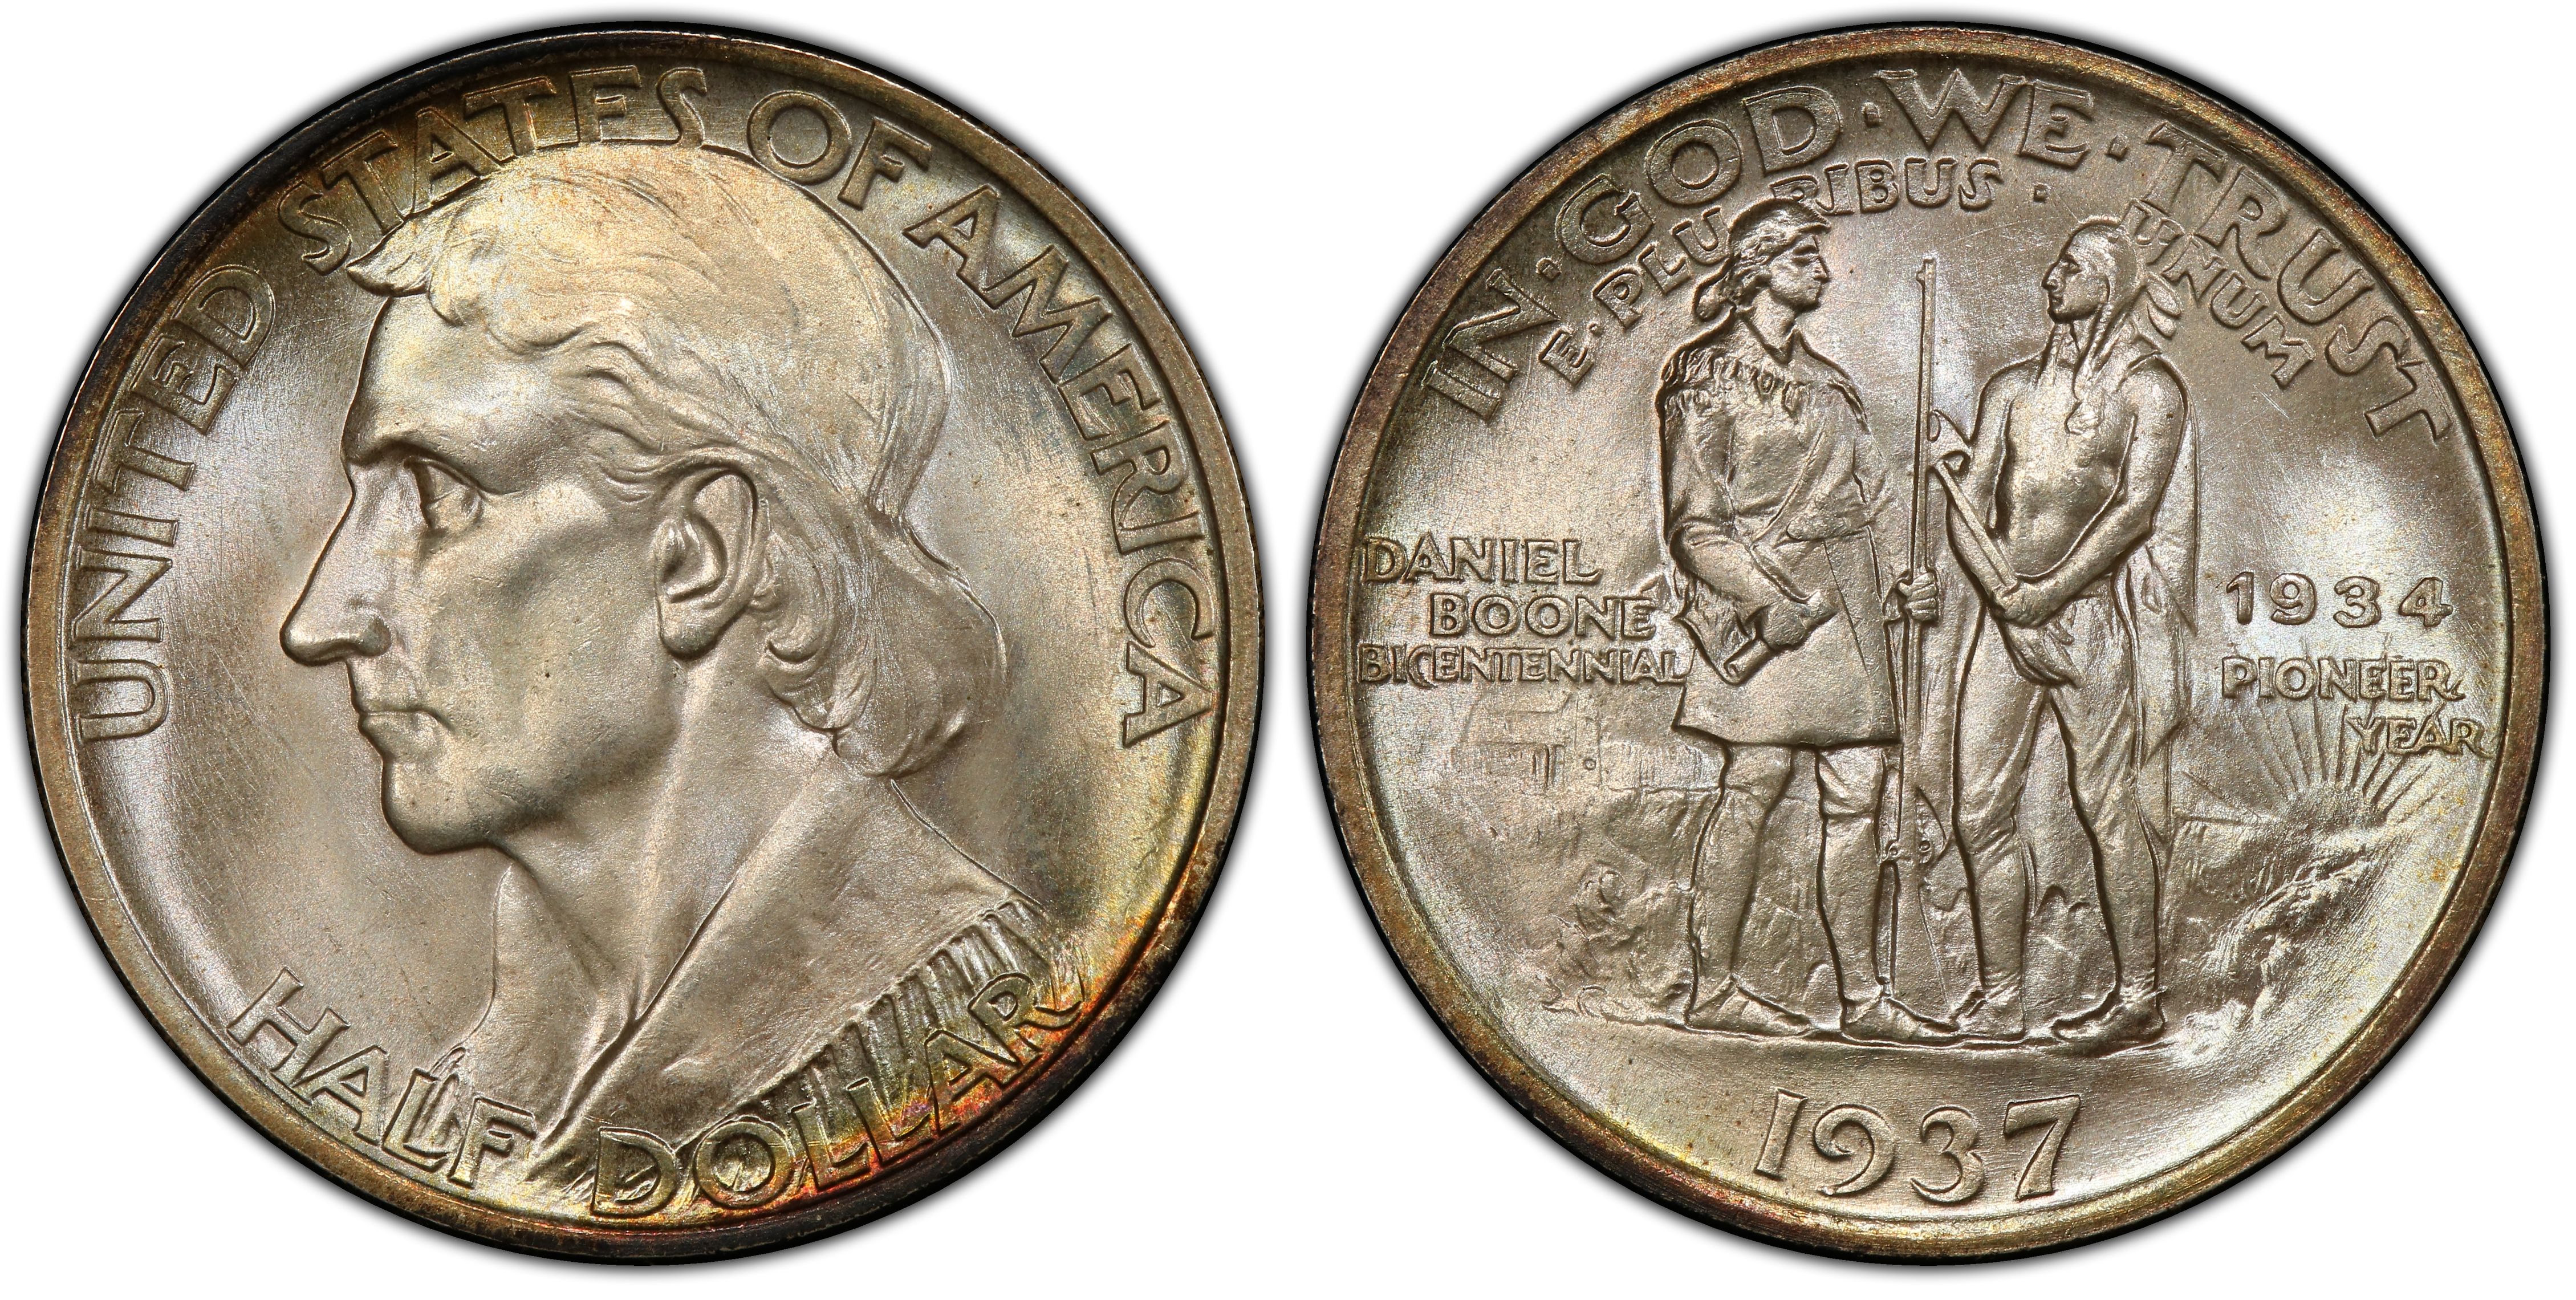 1937 50C Boone (Regular Strike) Silver Commemorative - PCGS CoinFacts